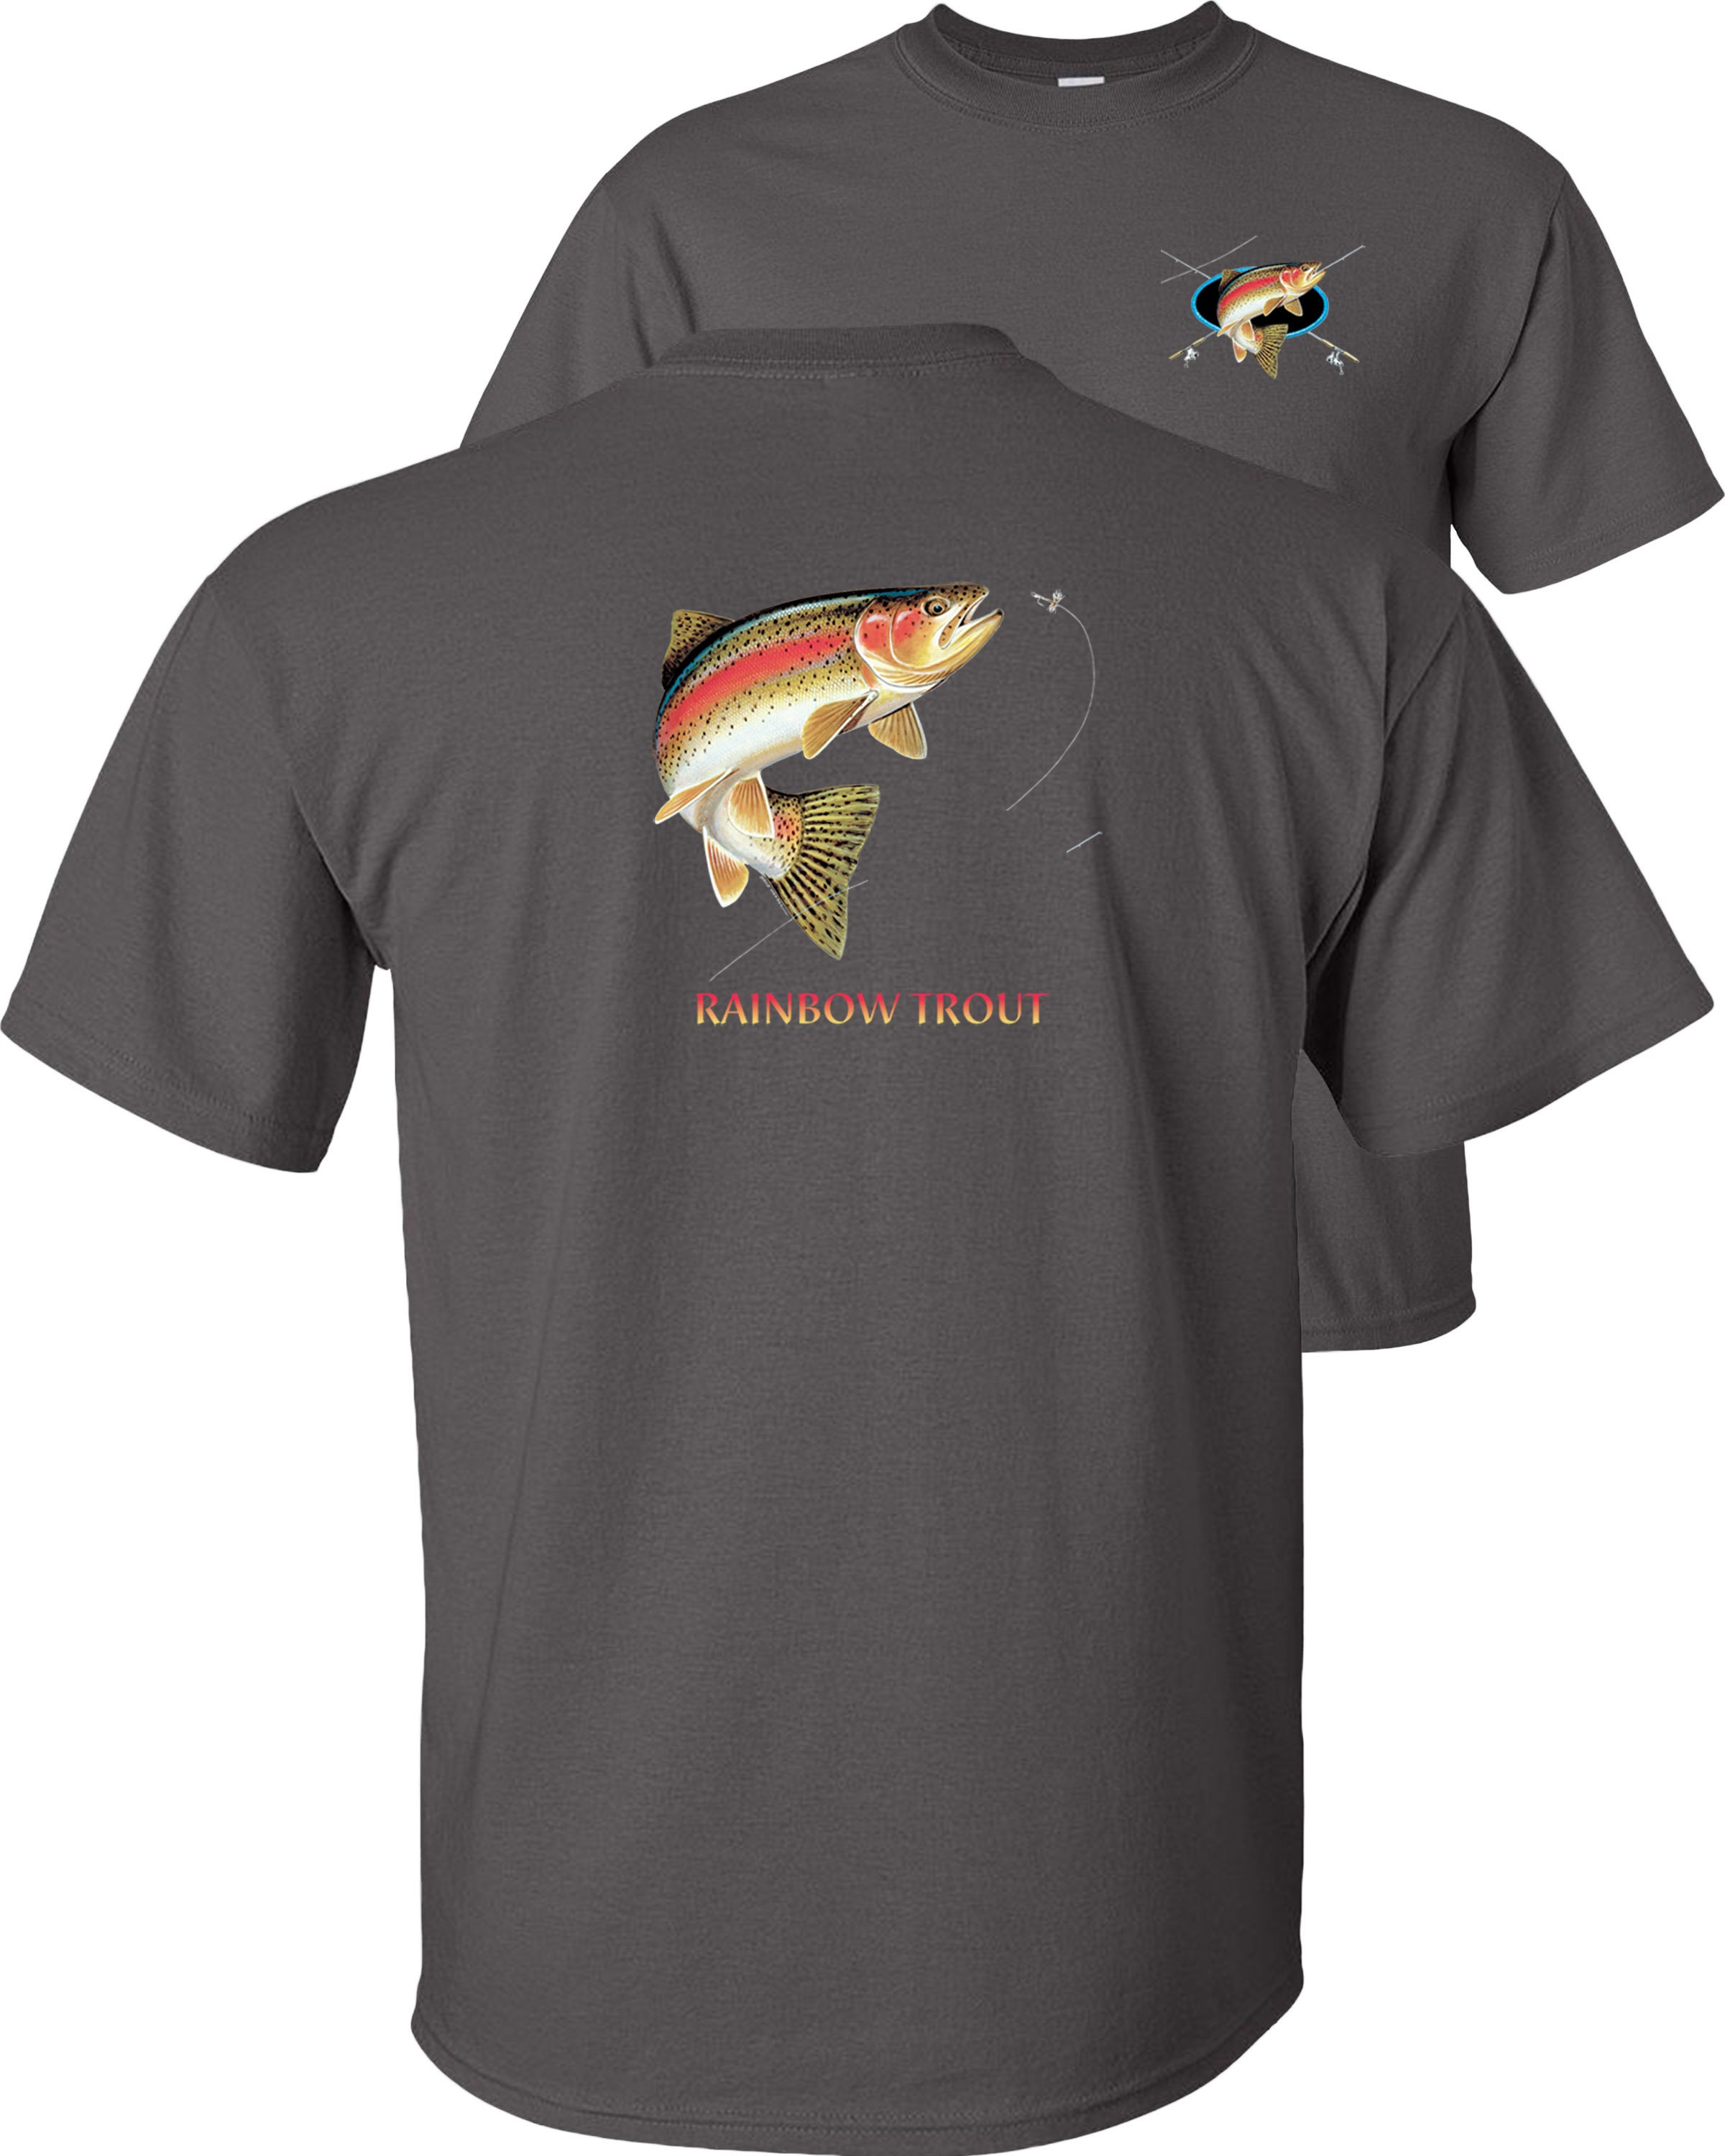 Trout T-Shirt Profile Rainbow Trout Fly Fishing Adult Unisex | Etsy